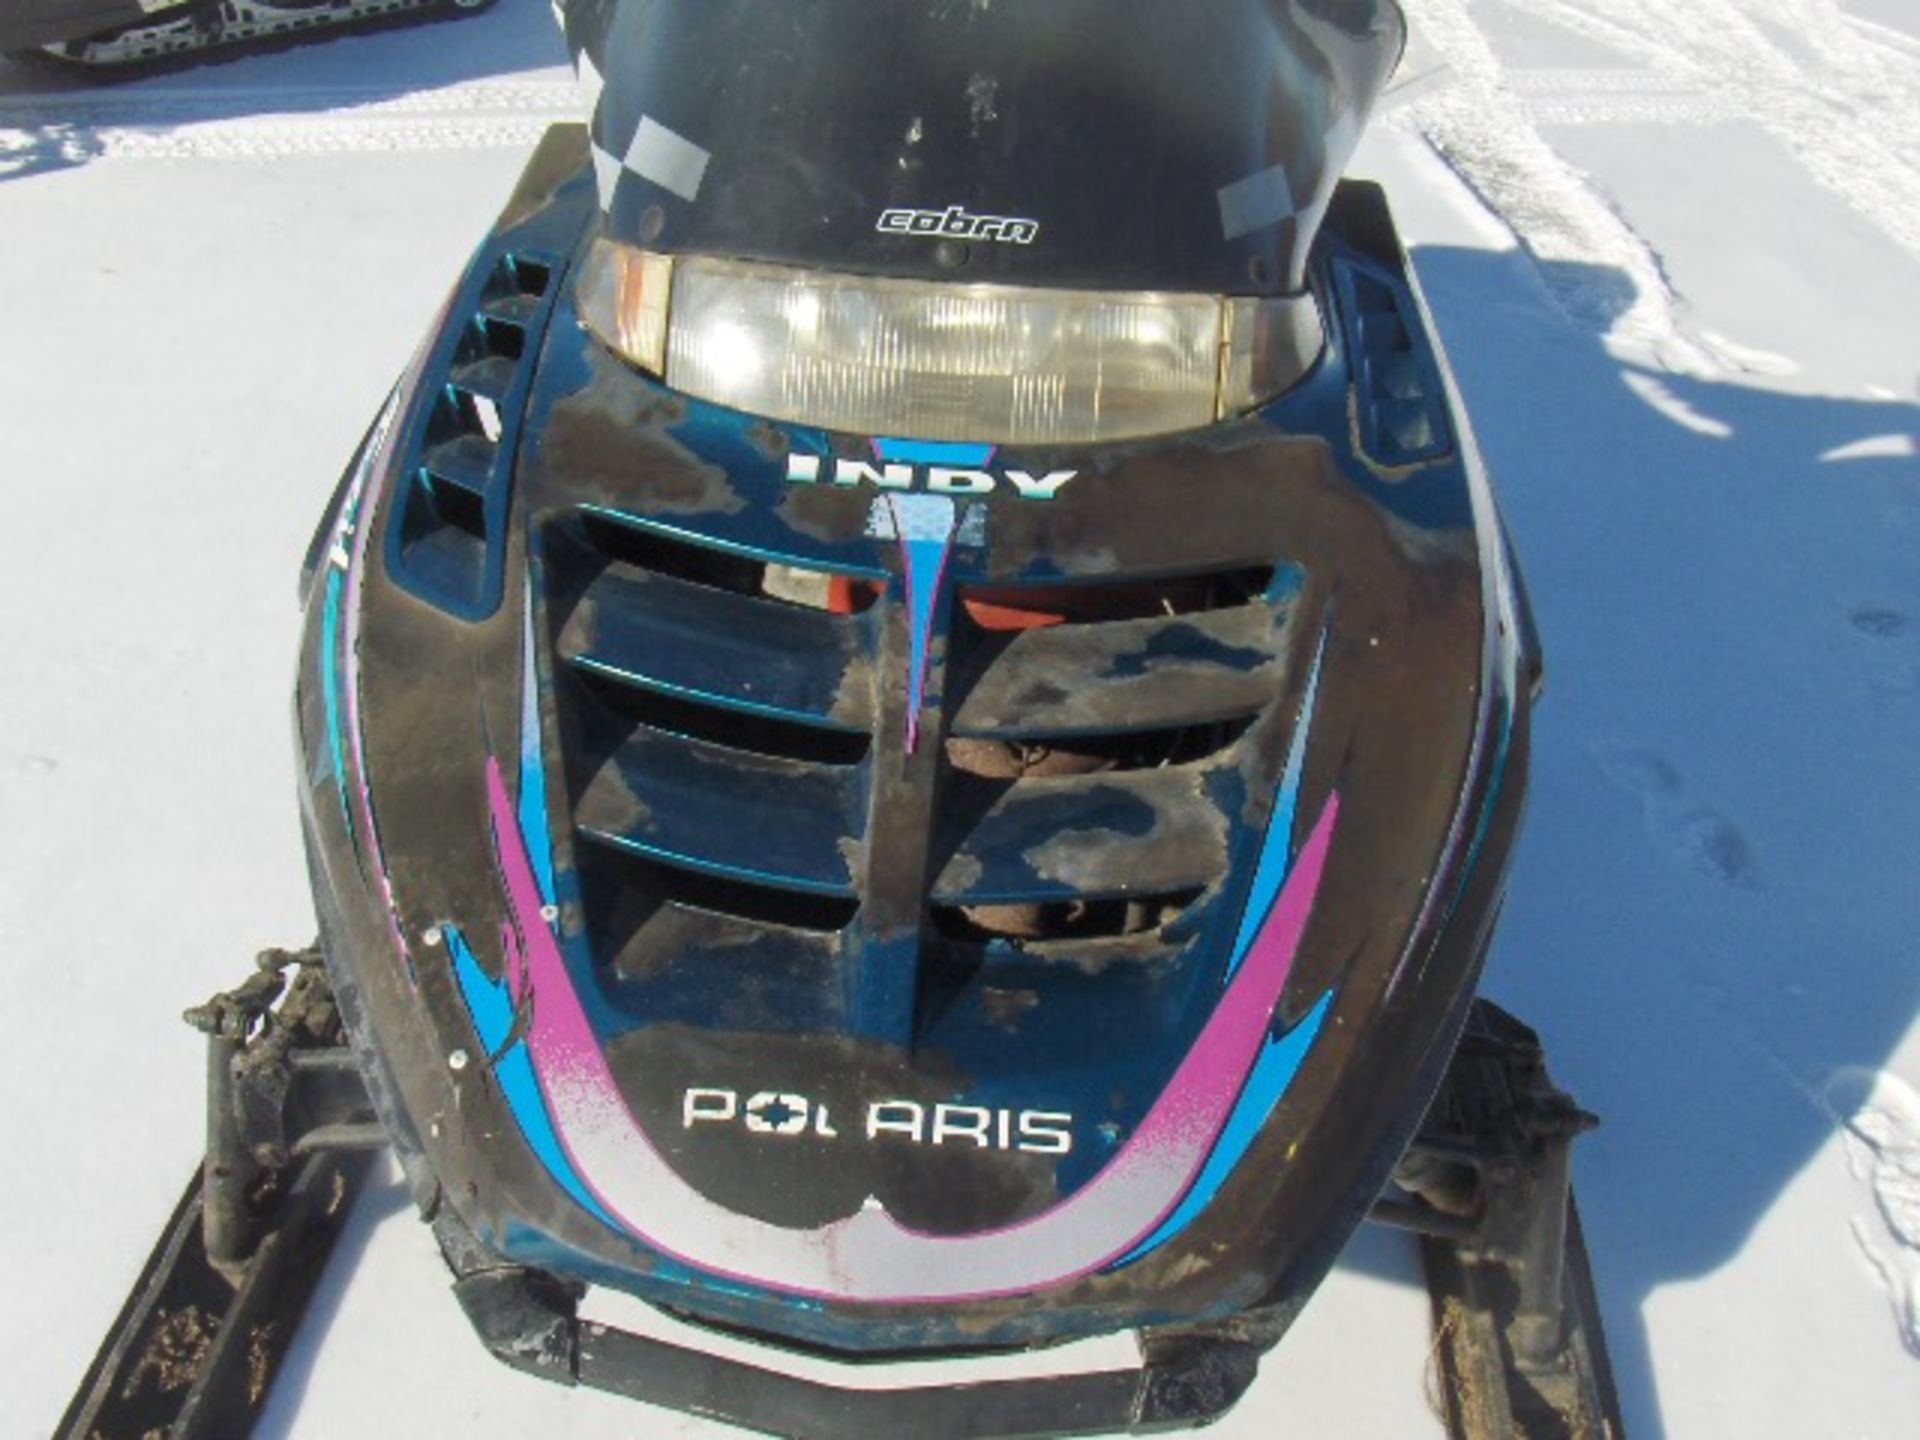 1998 POLARIS 500 INDY TRAIL  3363766 snowmobile, sold with a signed registration - Image 2 of 4